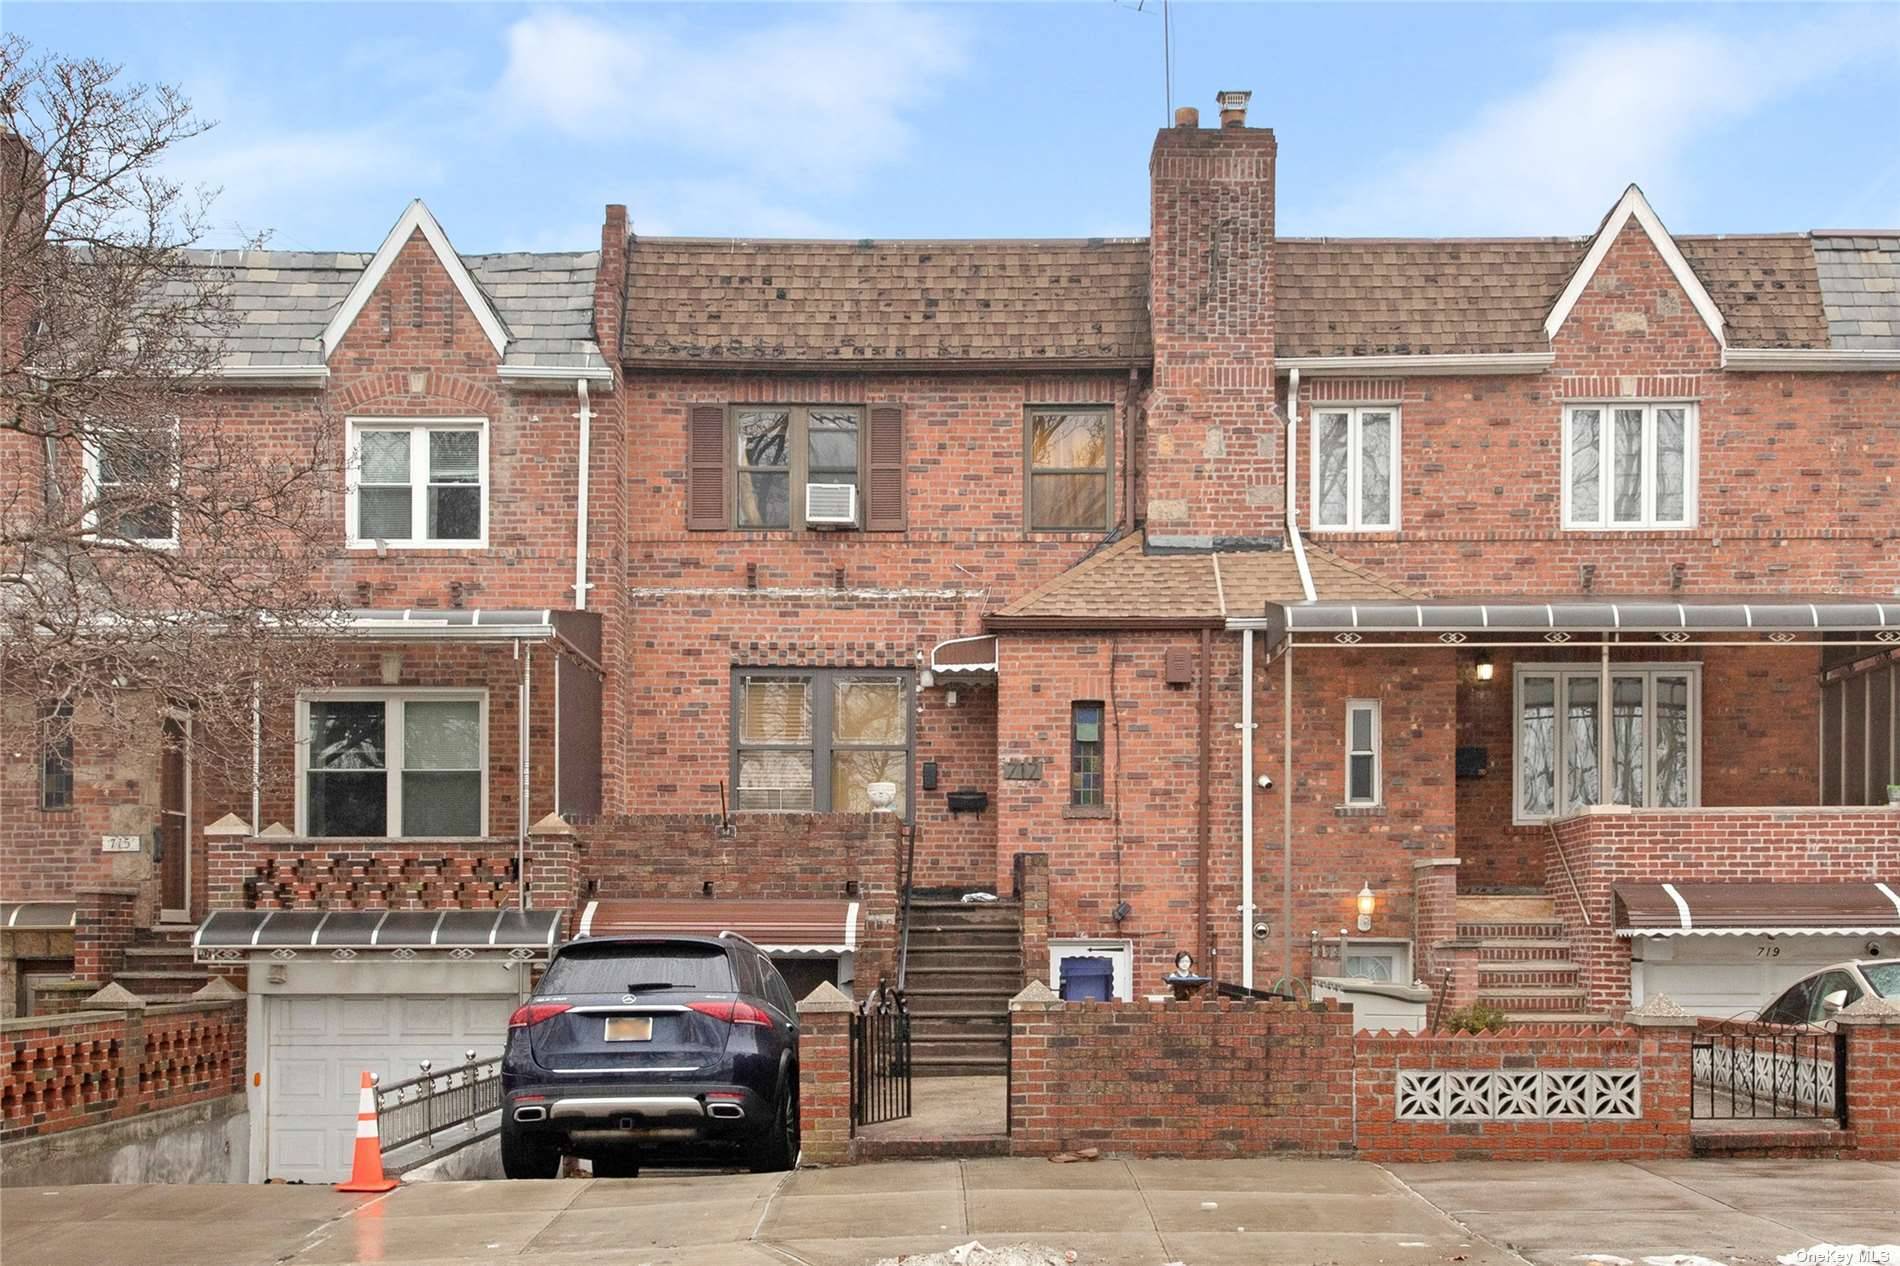 Welcome to this legal 2 family brick house located on a desirable block in Dyker heights.